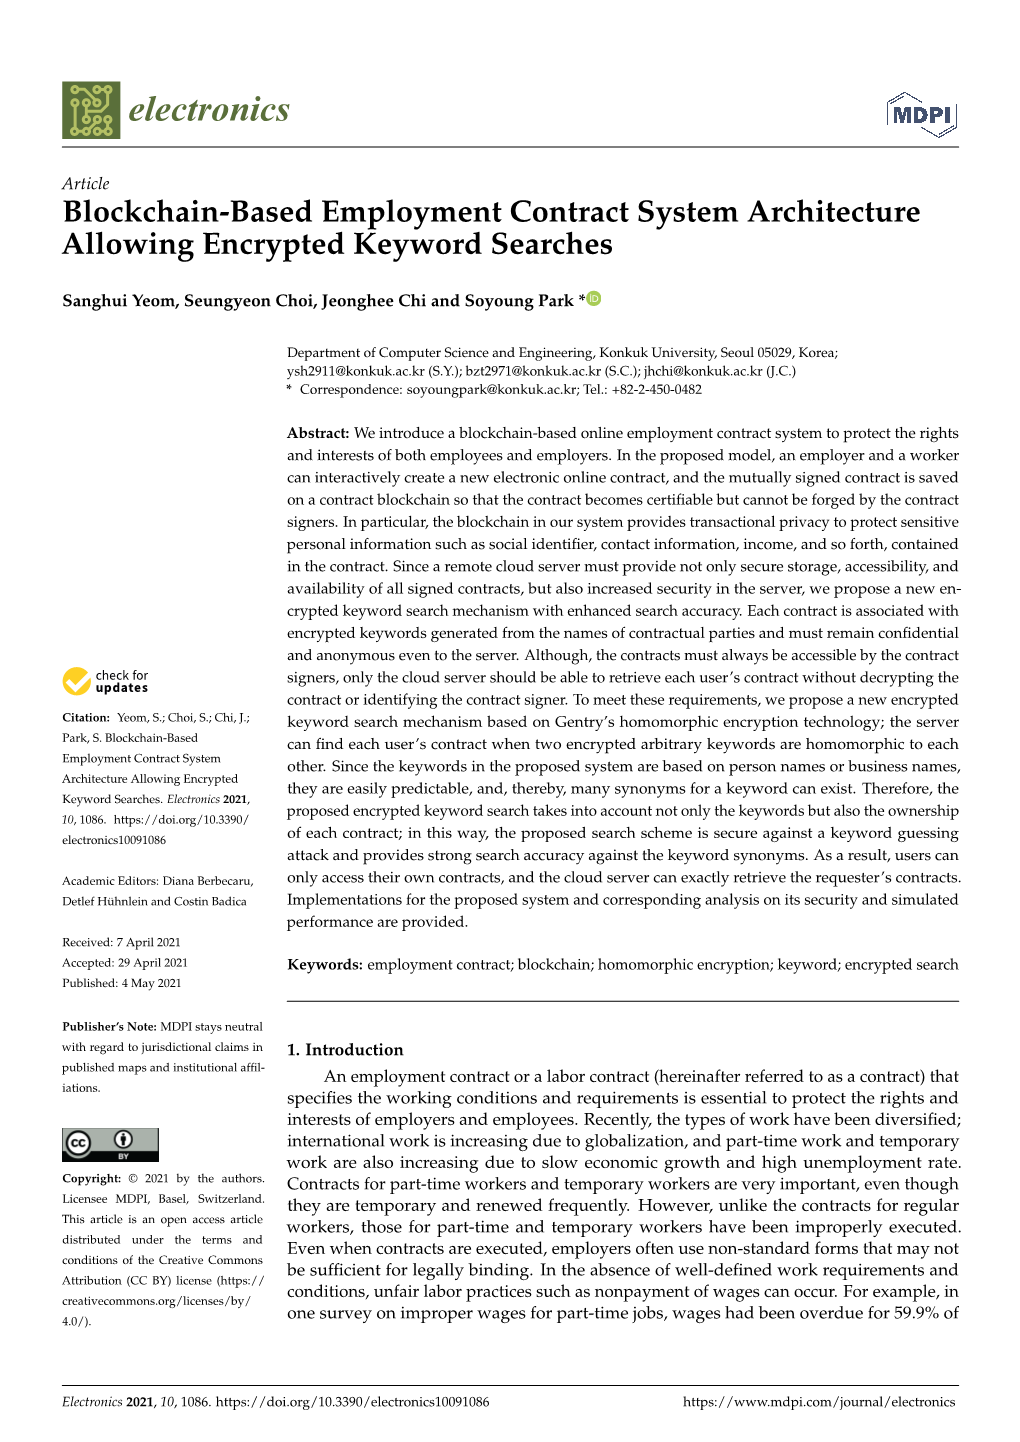 Blockchain-Based Employment Contract System Architecture Allowing Encrypted Keyword Searches